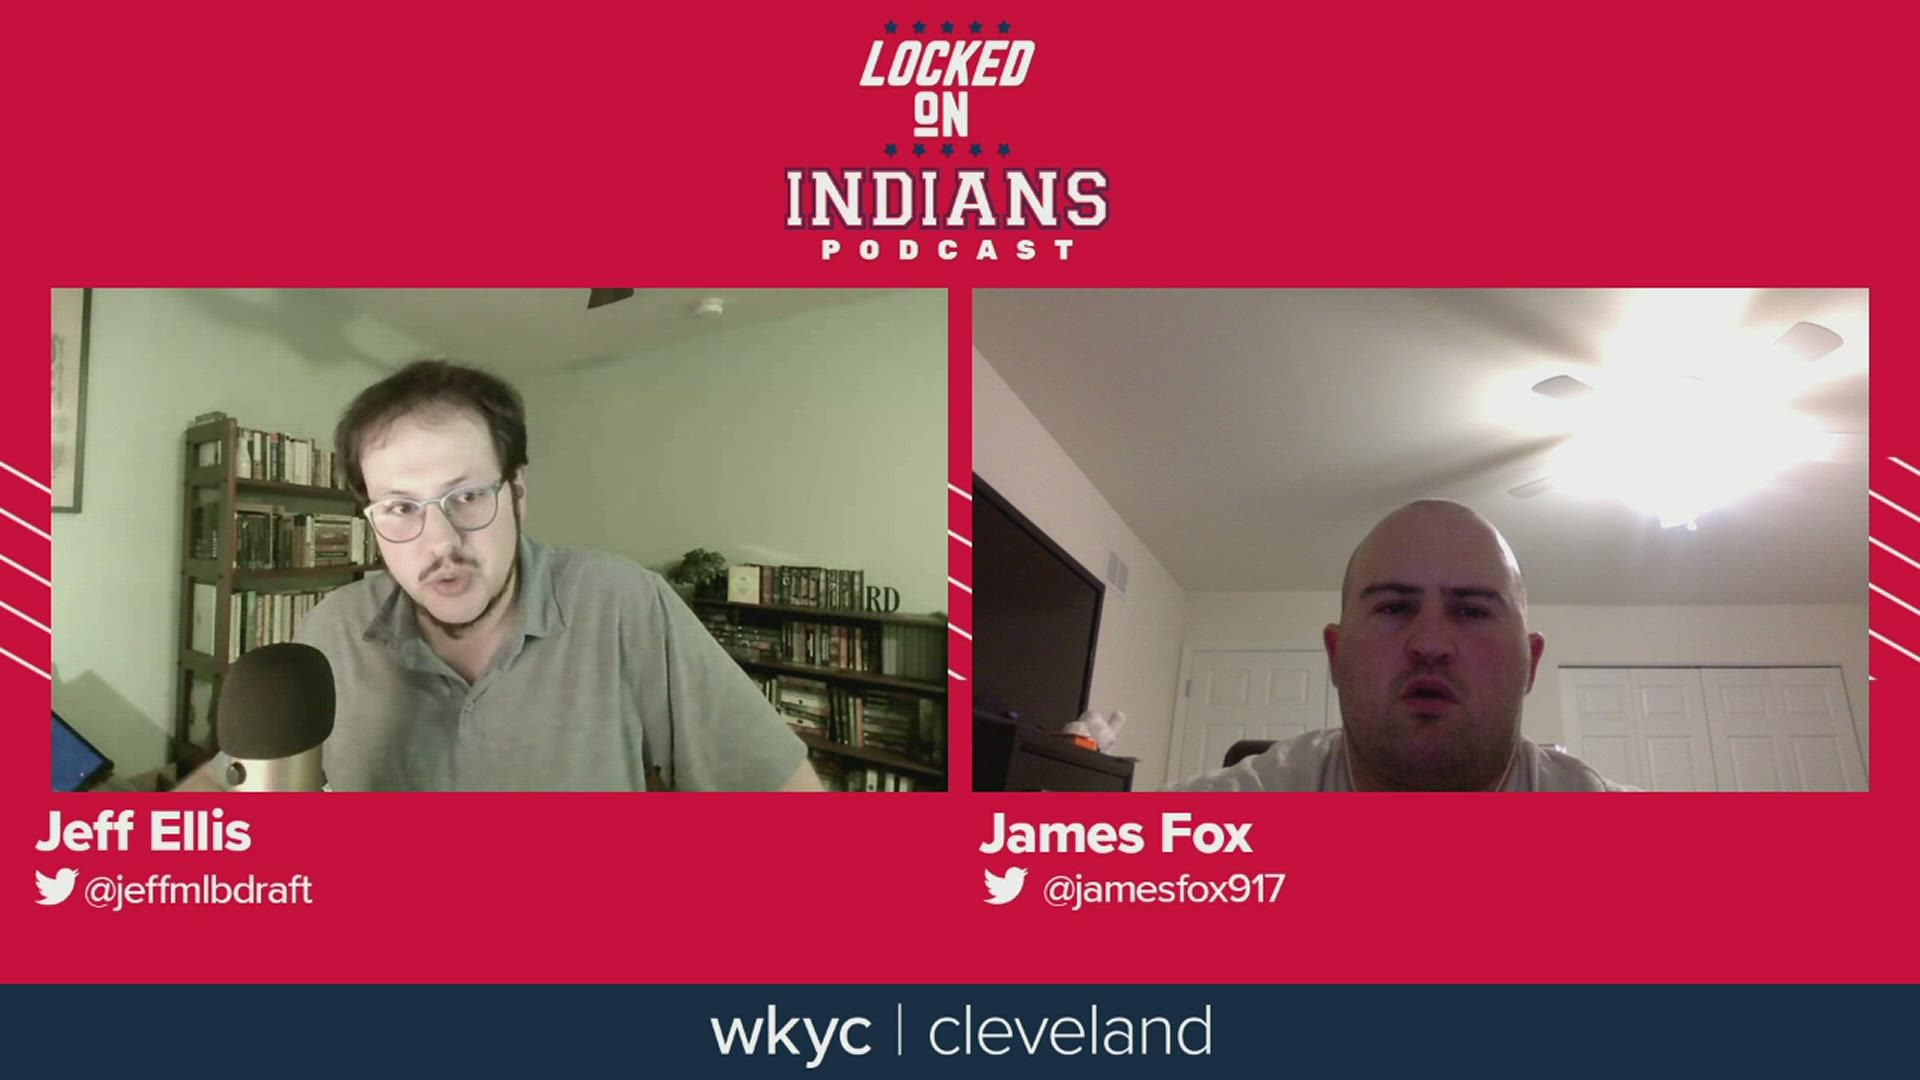 Future Sox writer James Fox joins this week to give an outsider's view of the Indians and to chat about Sox, their prospects, and the moves they have made.